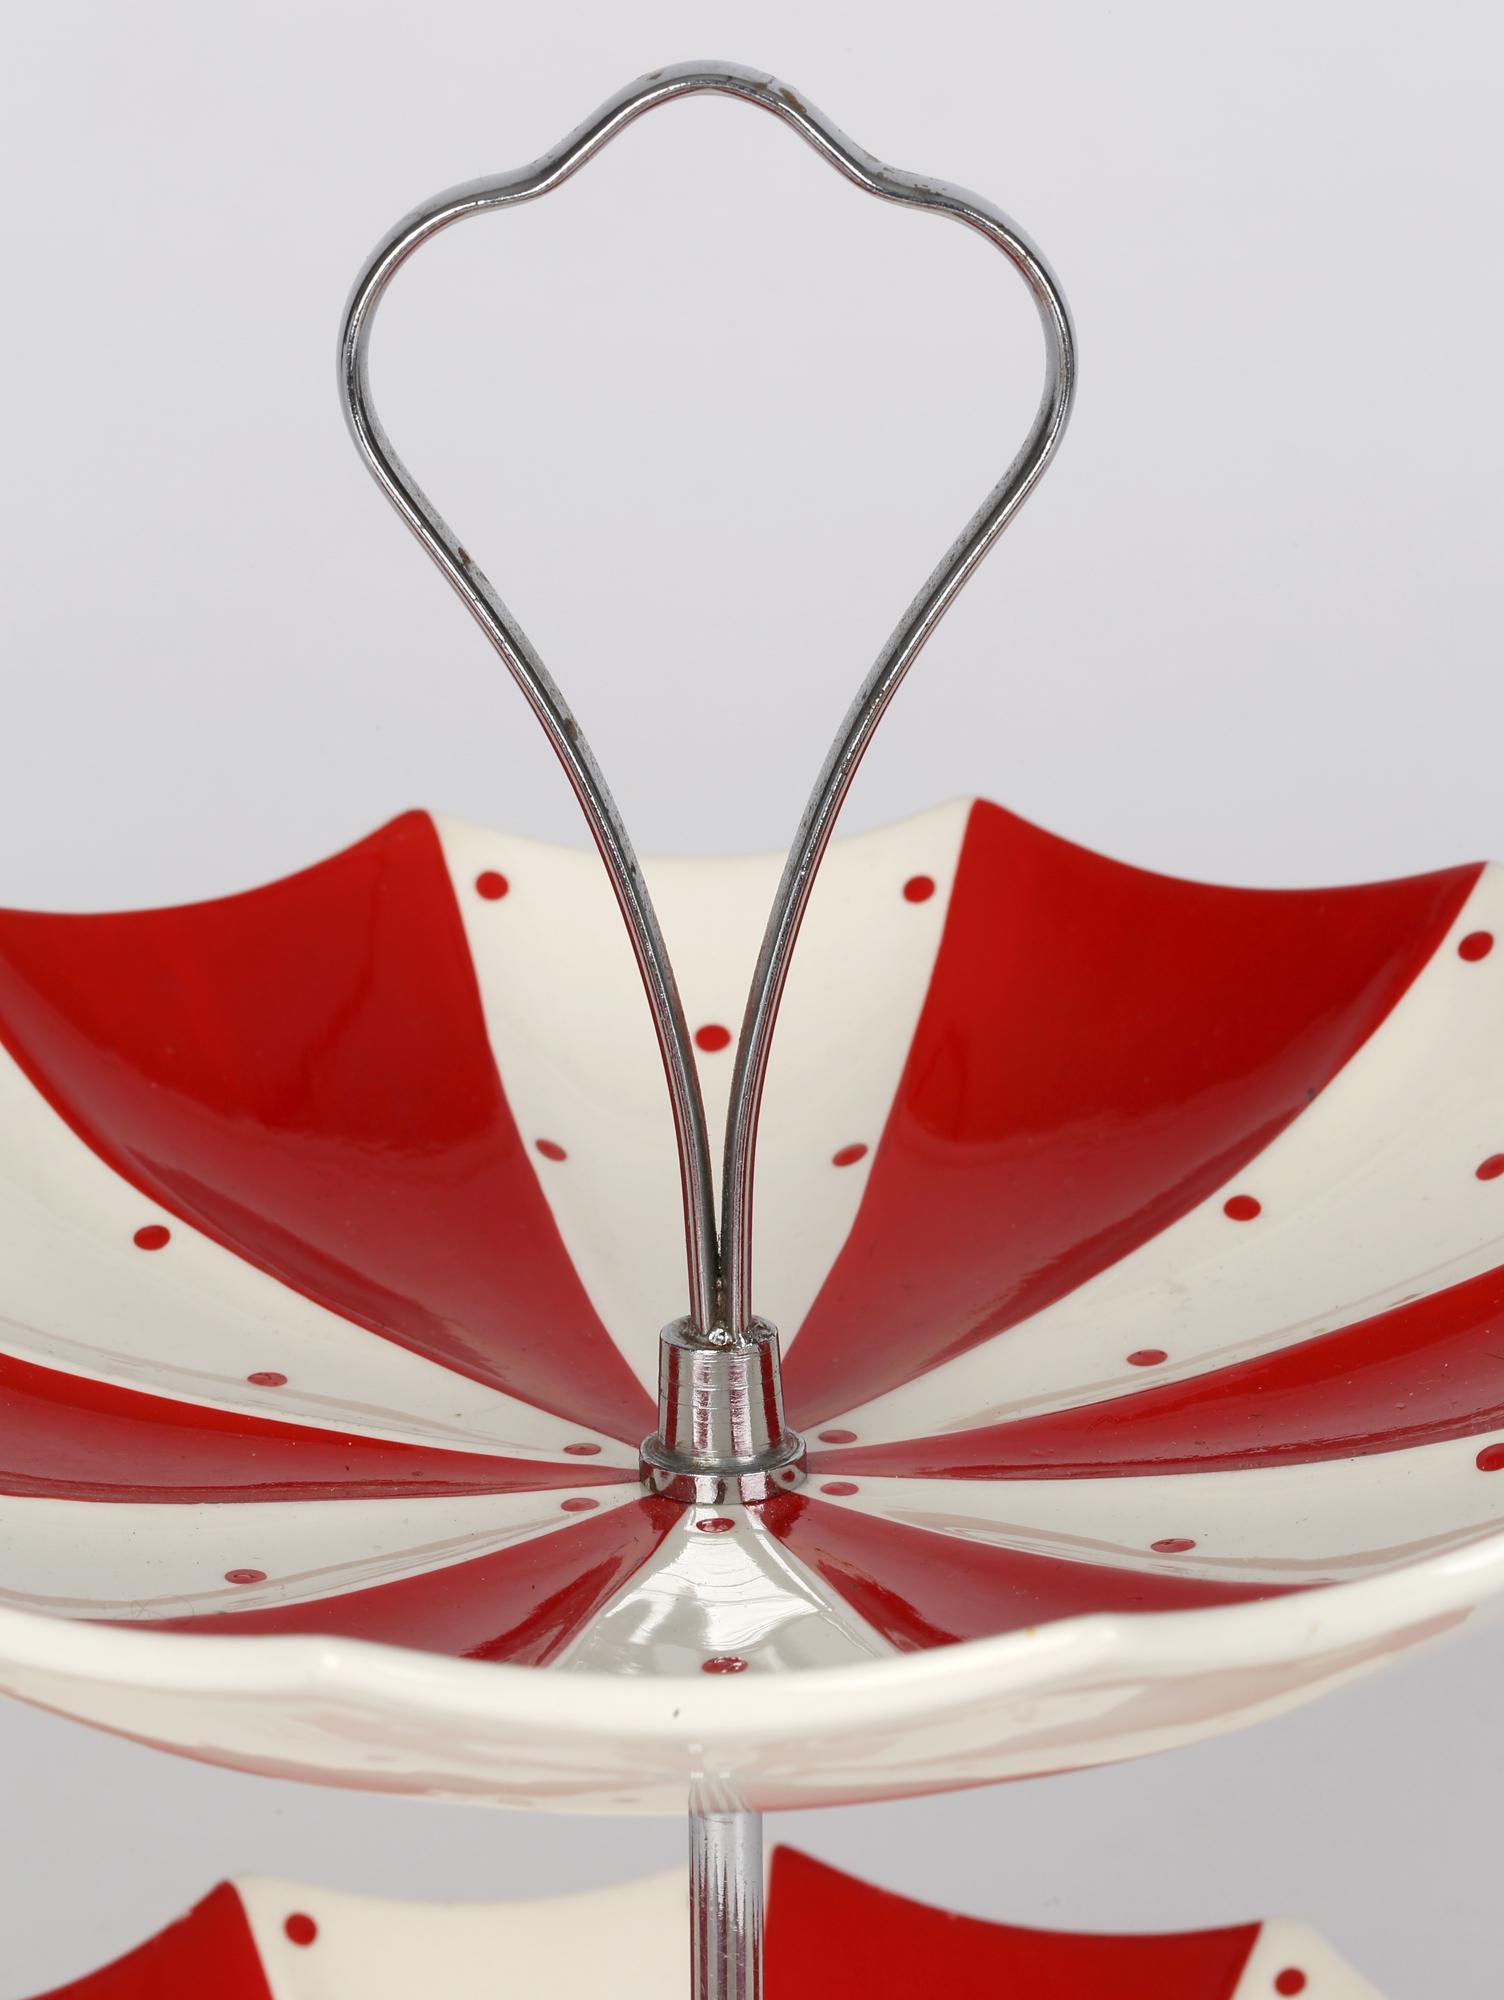 A very stylish mid-century Midwinter Modern Fashion Shape two tier cake stand in the red domino pattern and modelled as two umbrellas by prolific ceramic designer Jessie Tate (English, 1928-2010). The cake stand comprises of two umbrella shaped and